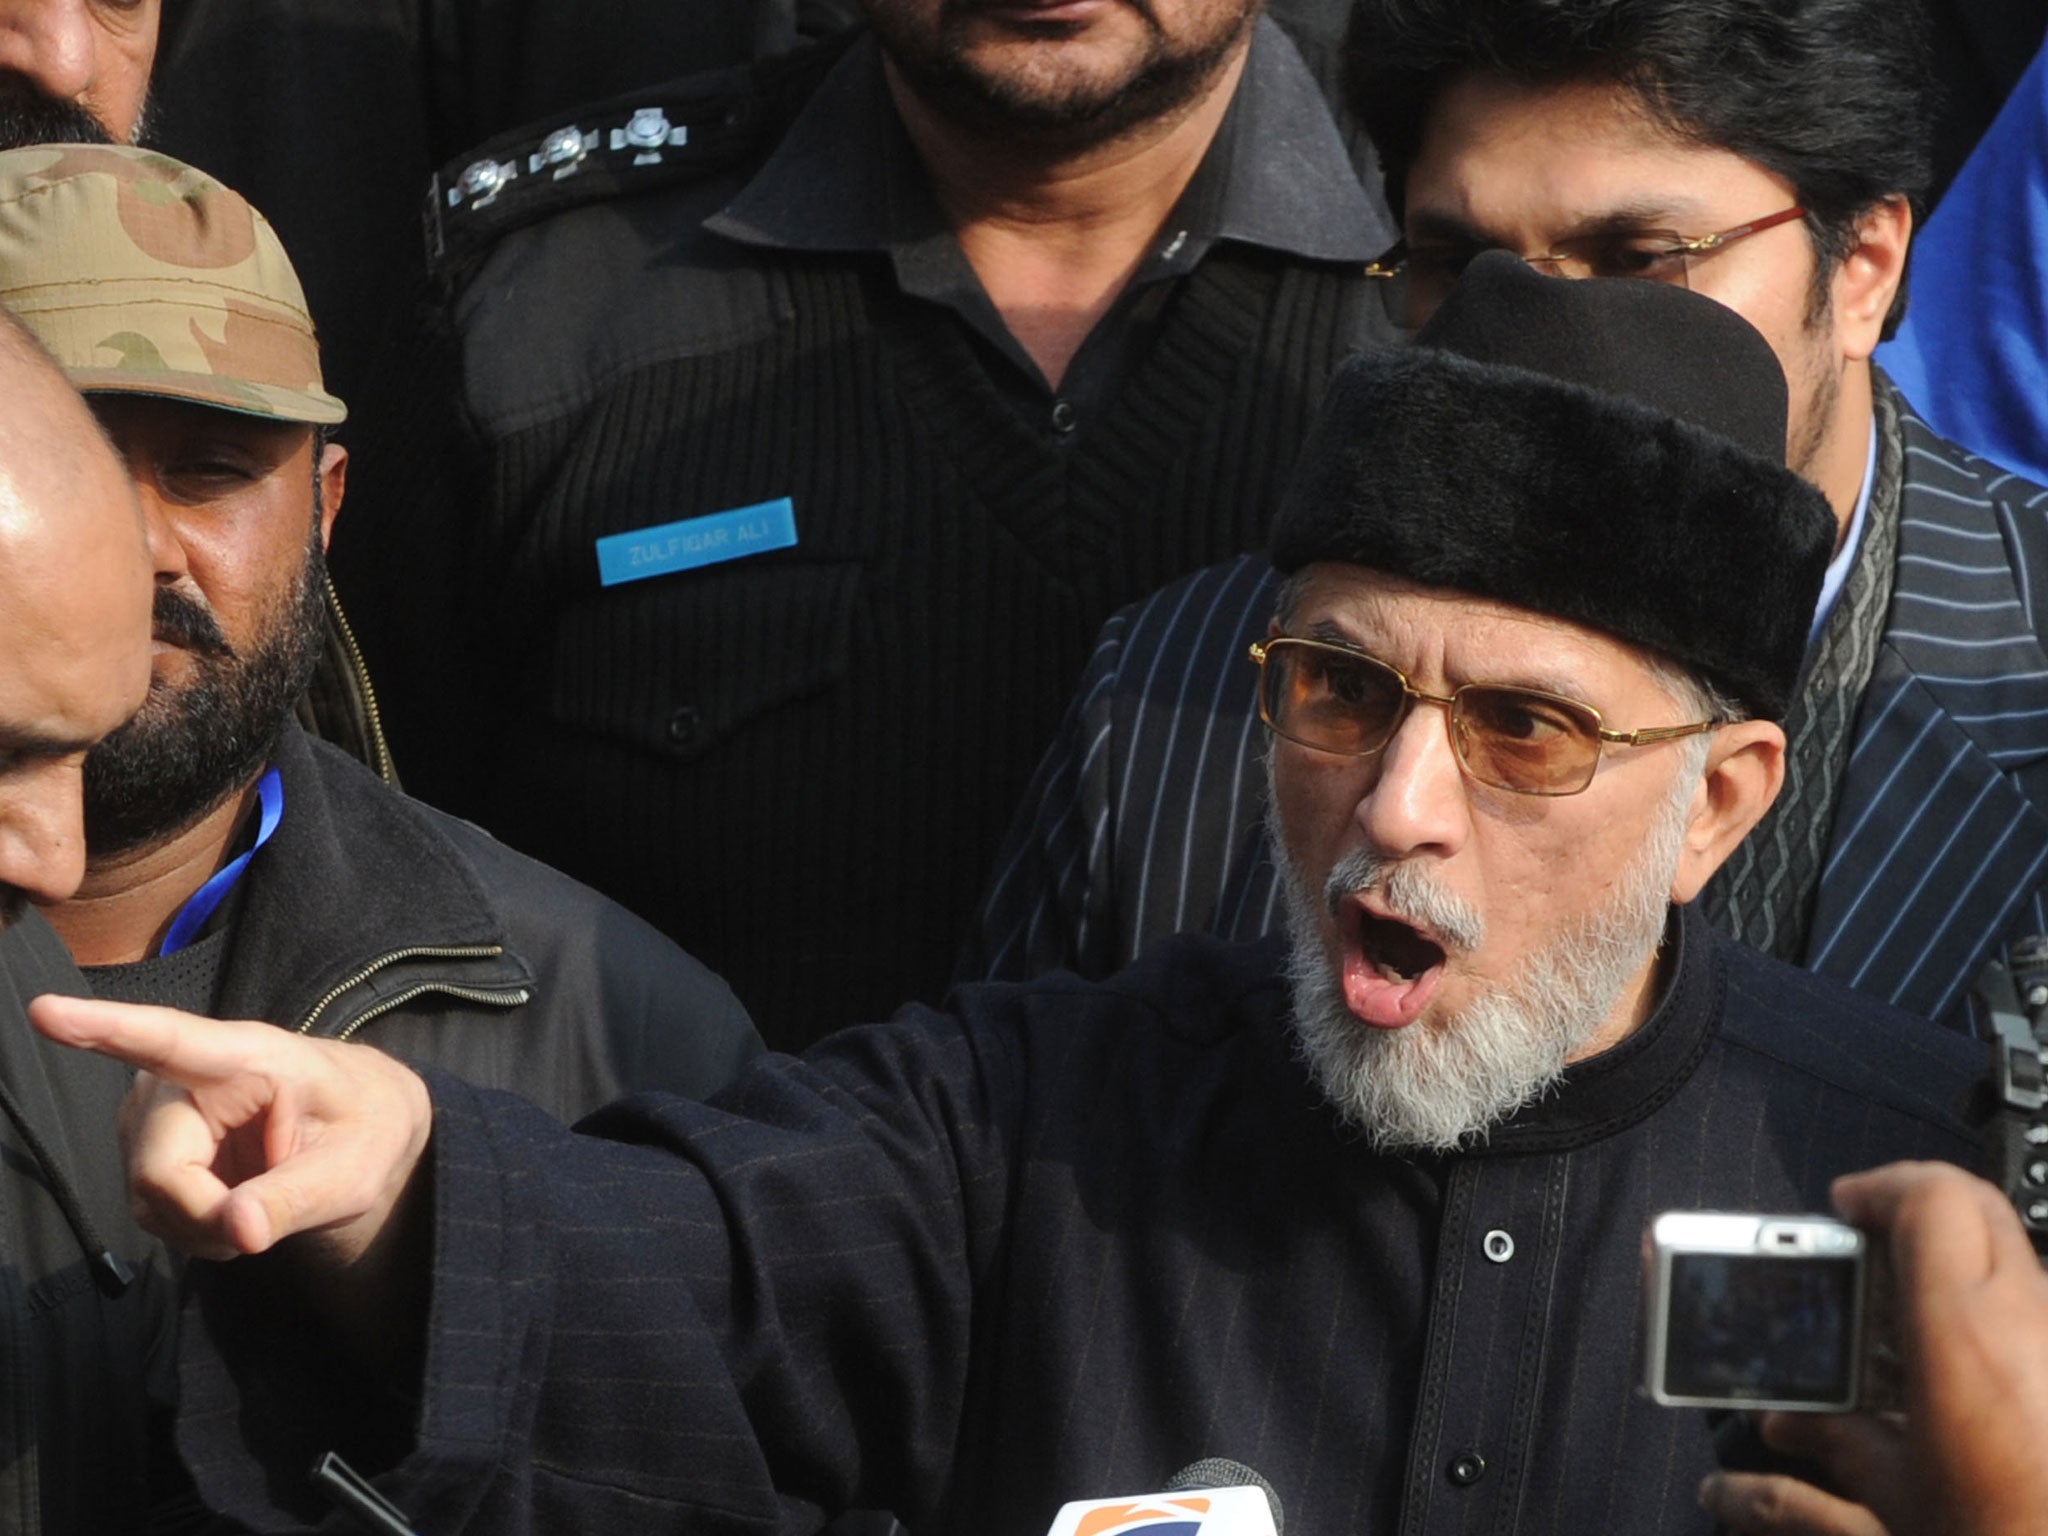 Pakistani religious leader Tahir-ul Qadri talks with media representatives before the start of protest march in Lahore on January 13, 2013.